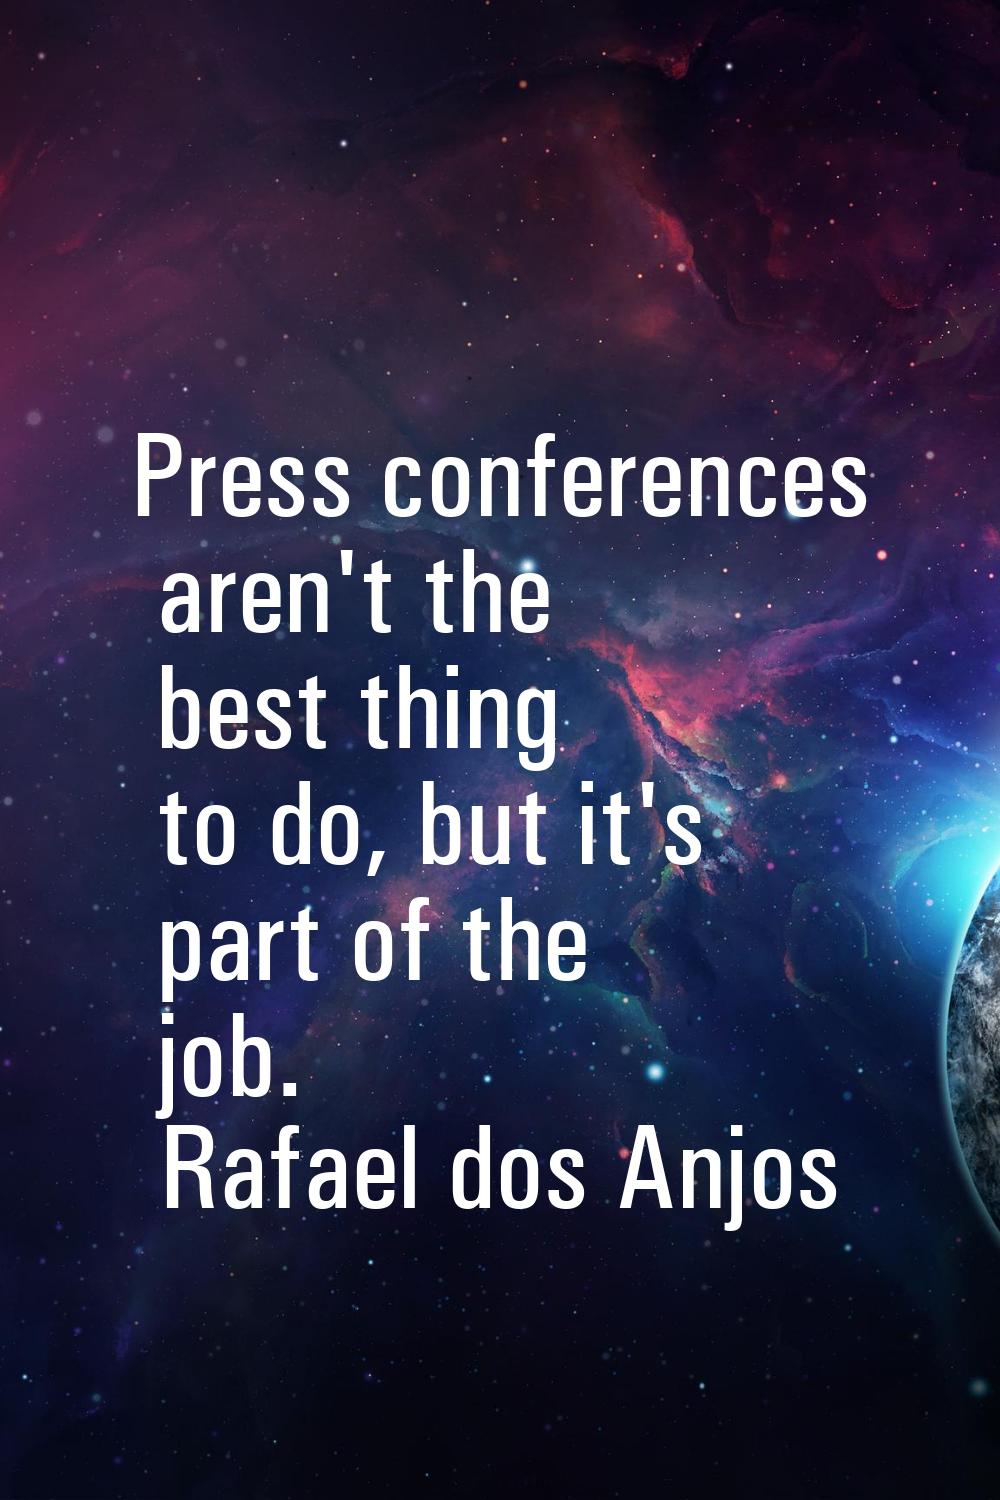 Press conferences aren't the best thing to do, but it's part of the job.